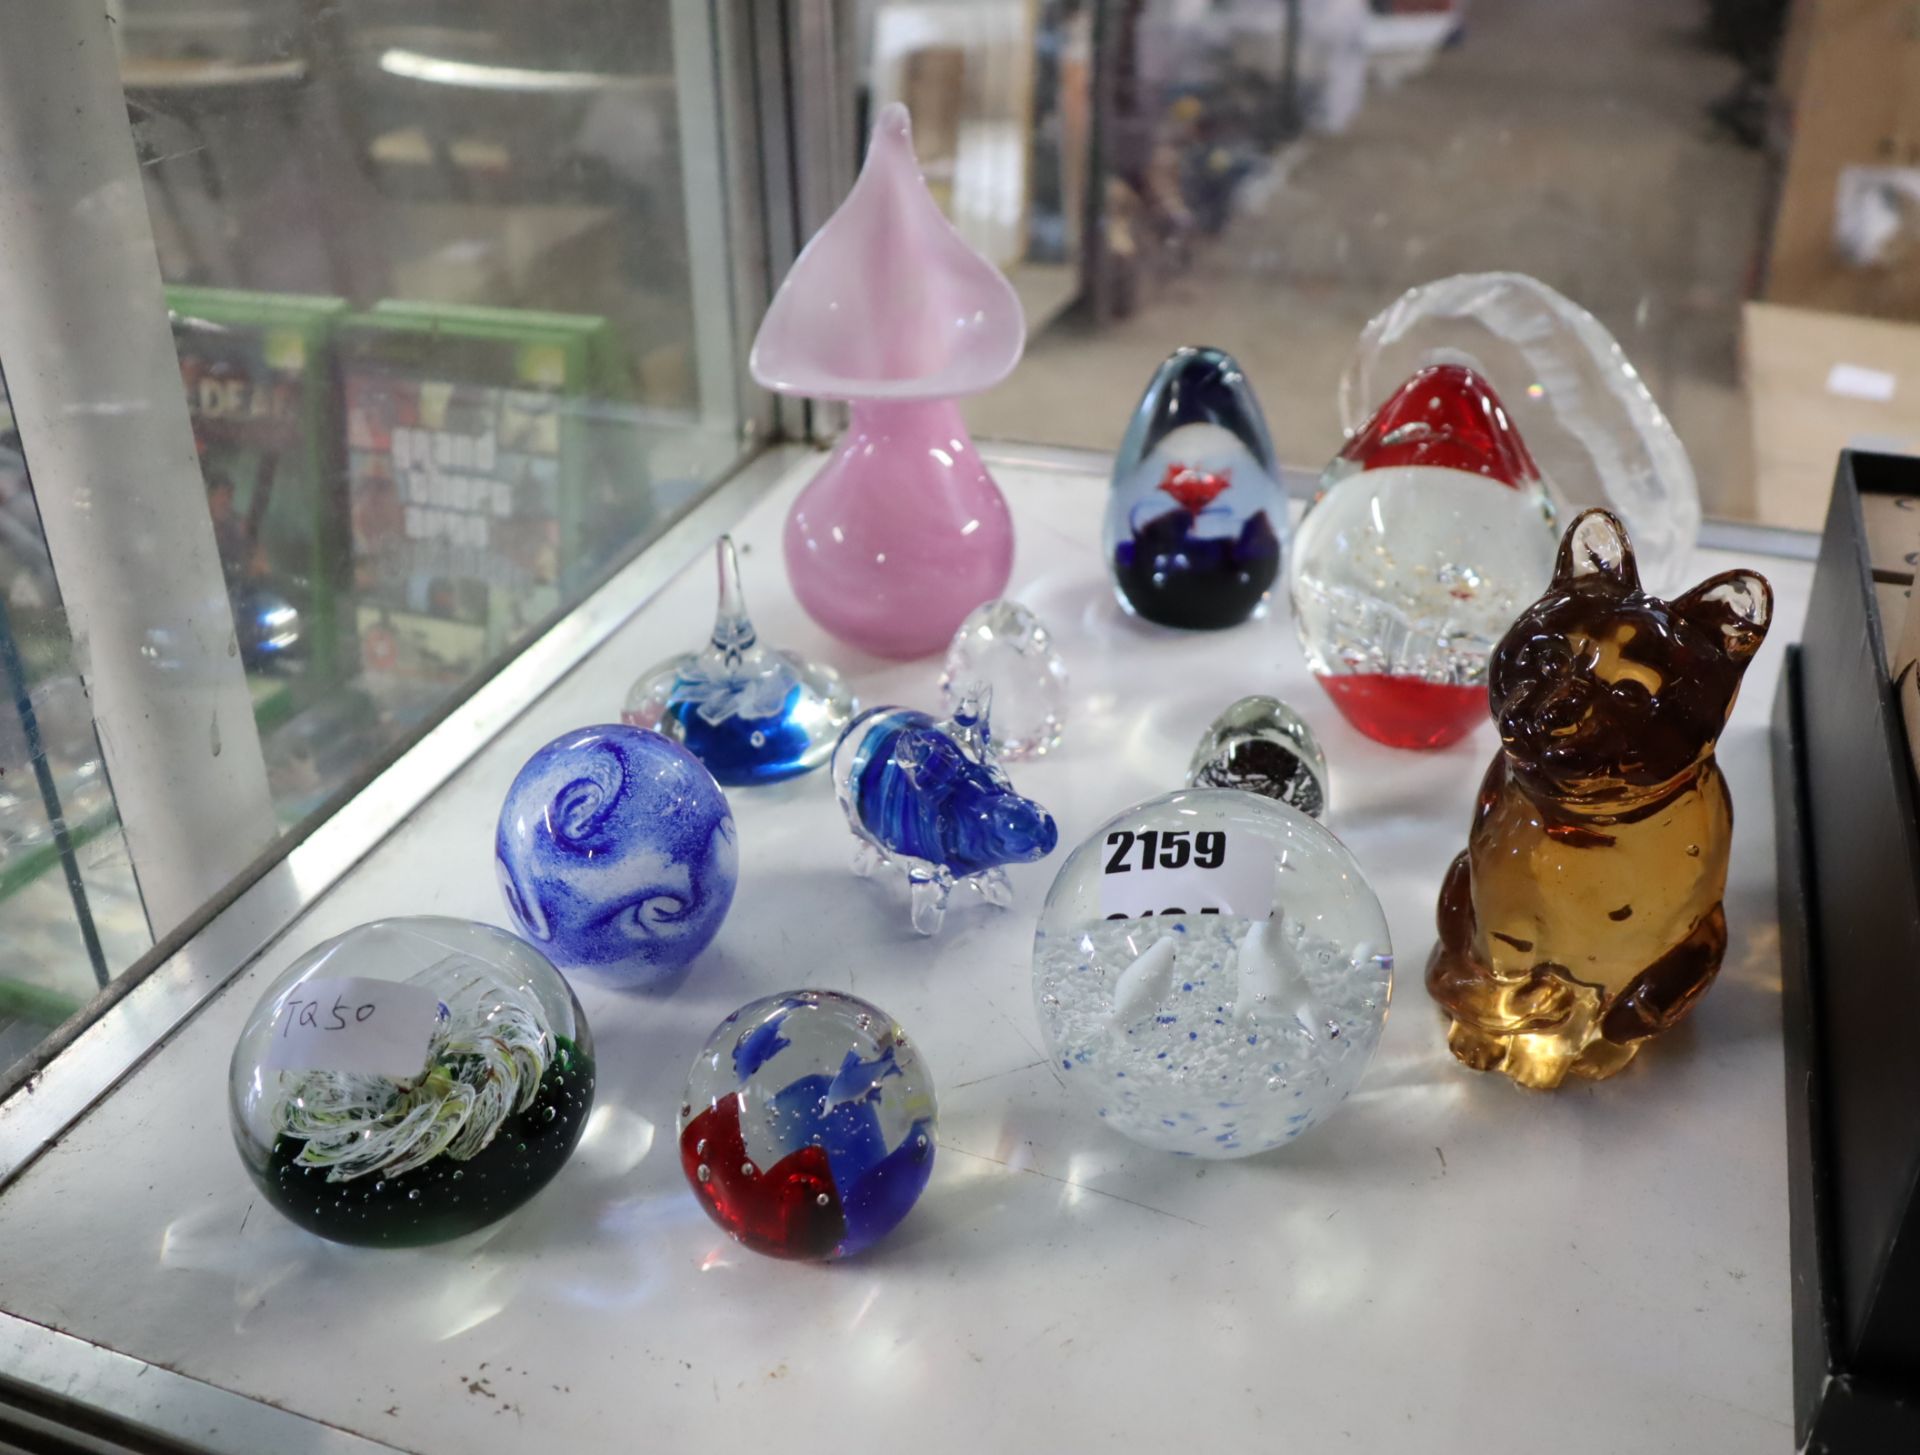 Quantity of glass paperweights and ornaments